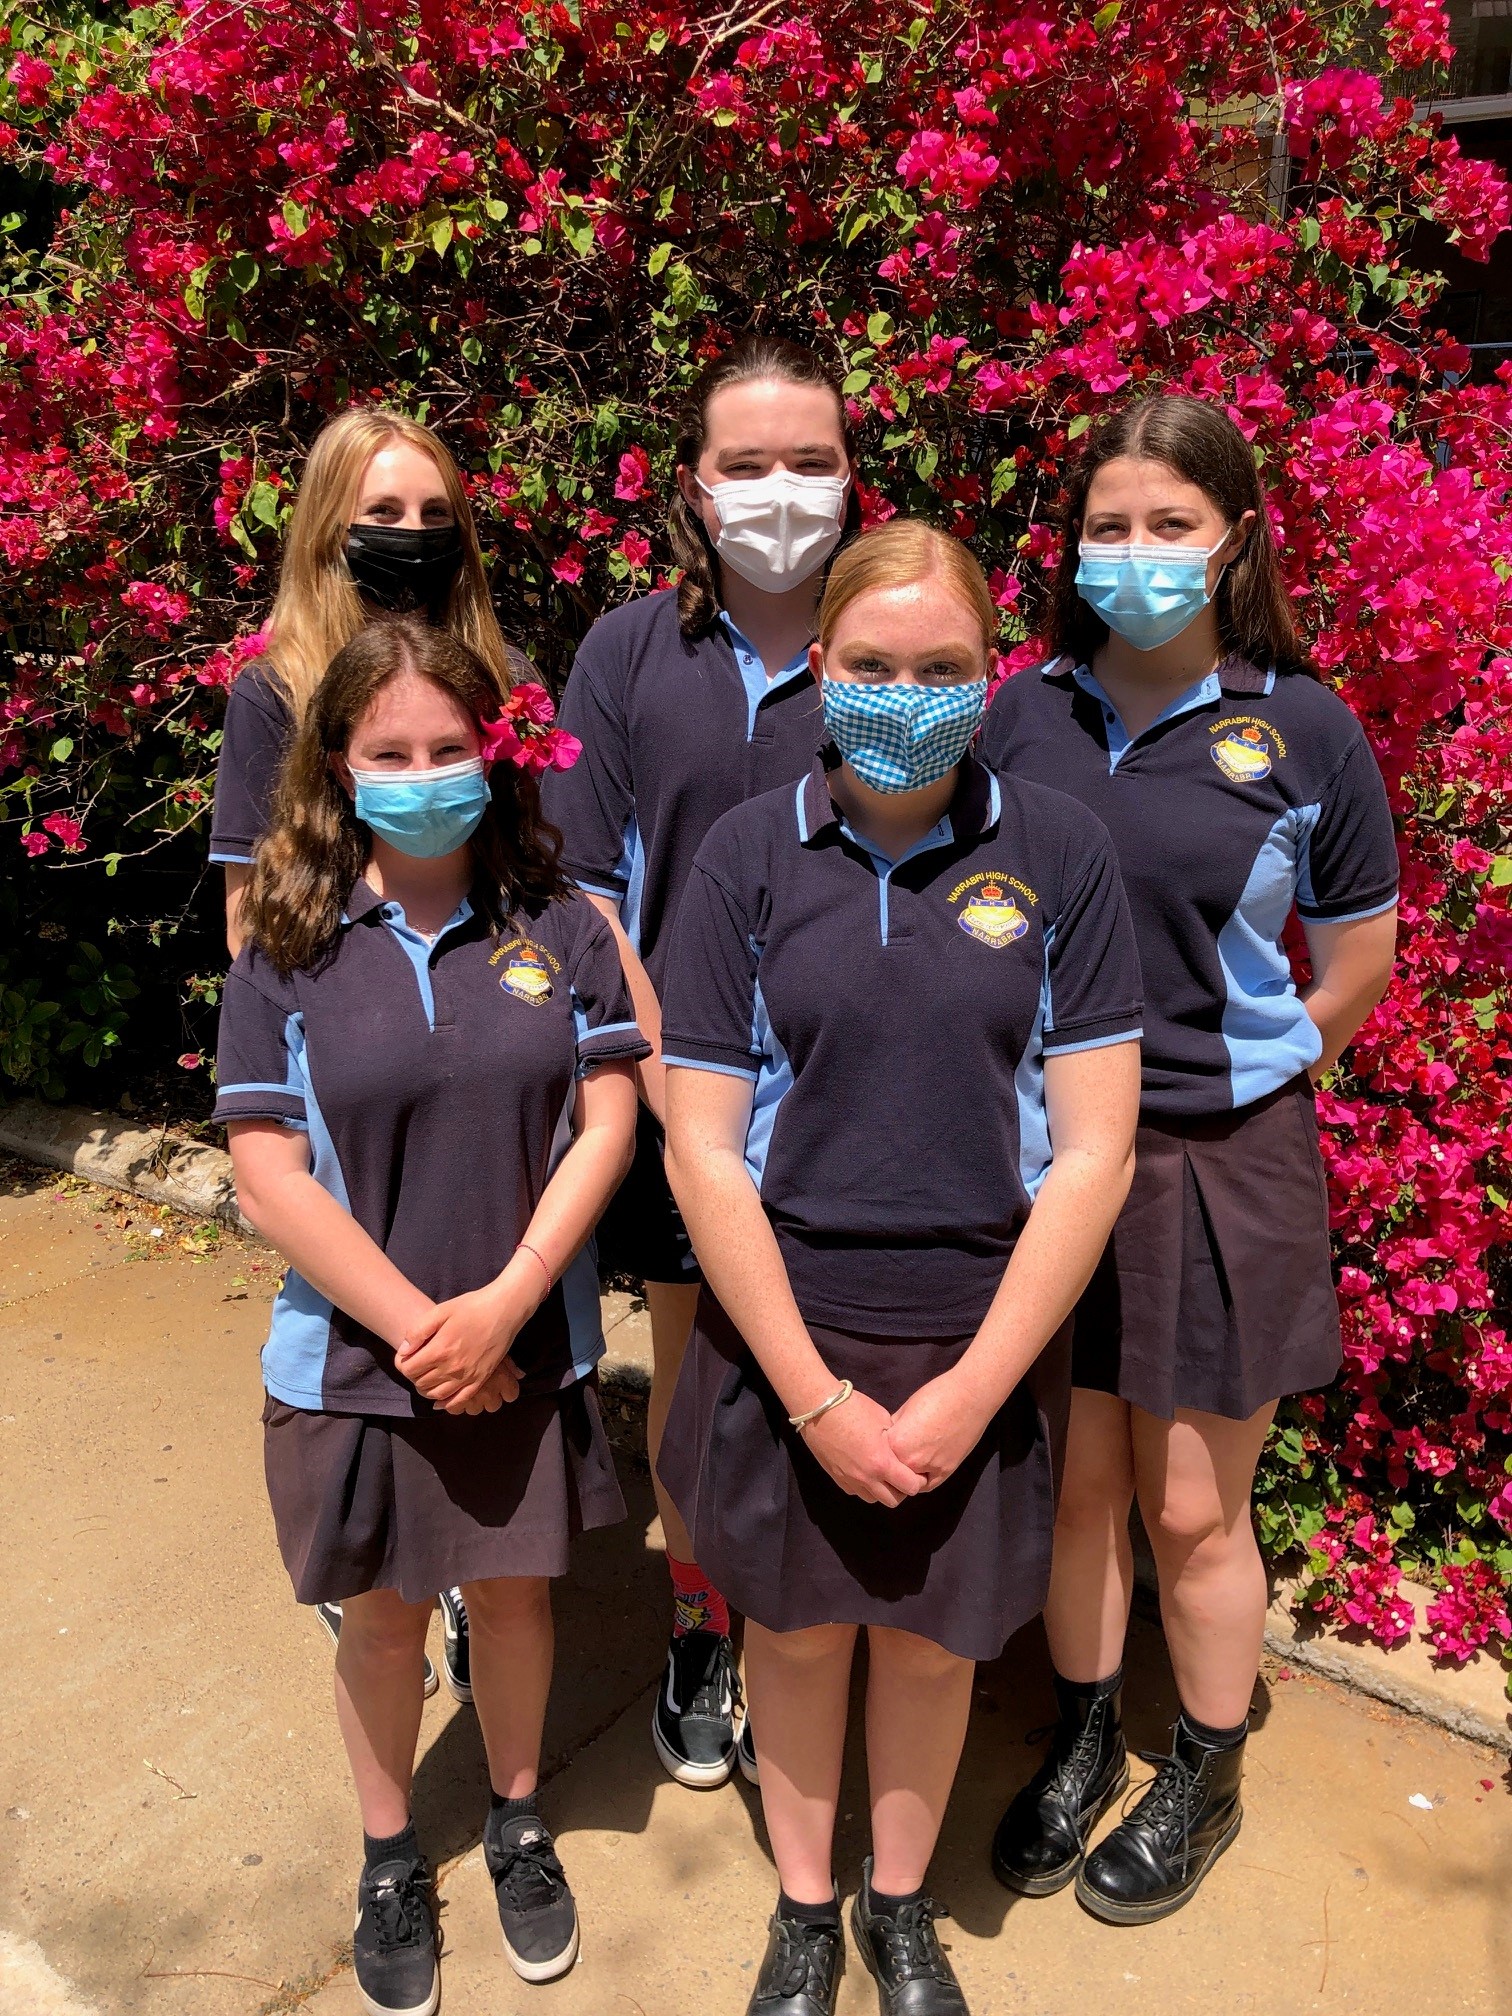 Back, Zara Bennett, Logan Hewett, Addison Russell, front Kaylyn Chater and Poppy Smith making the most of the school’s pretty pink flora.